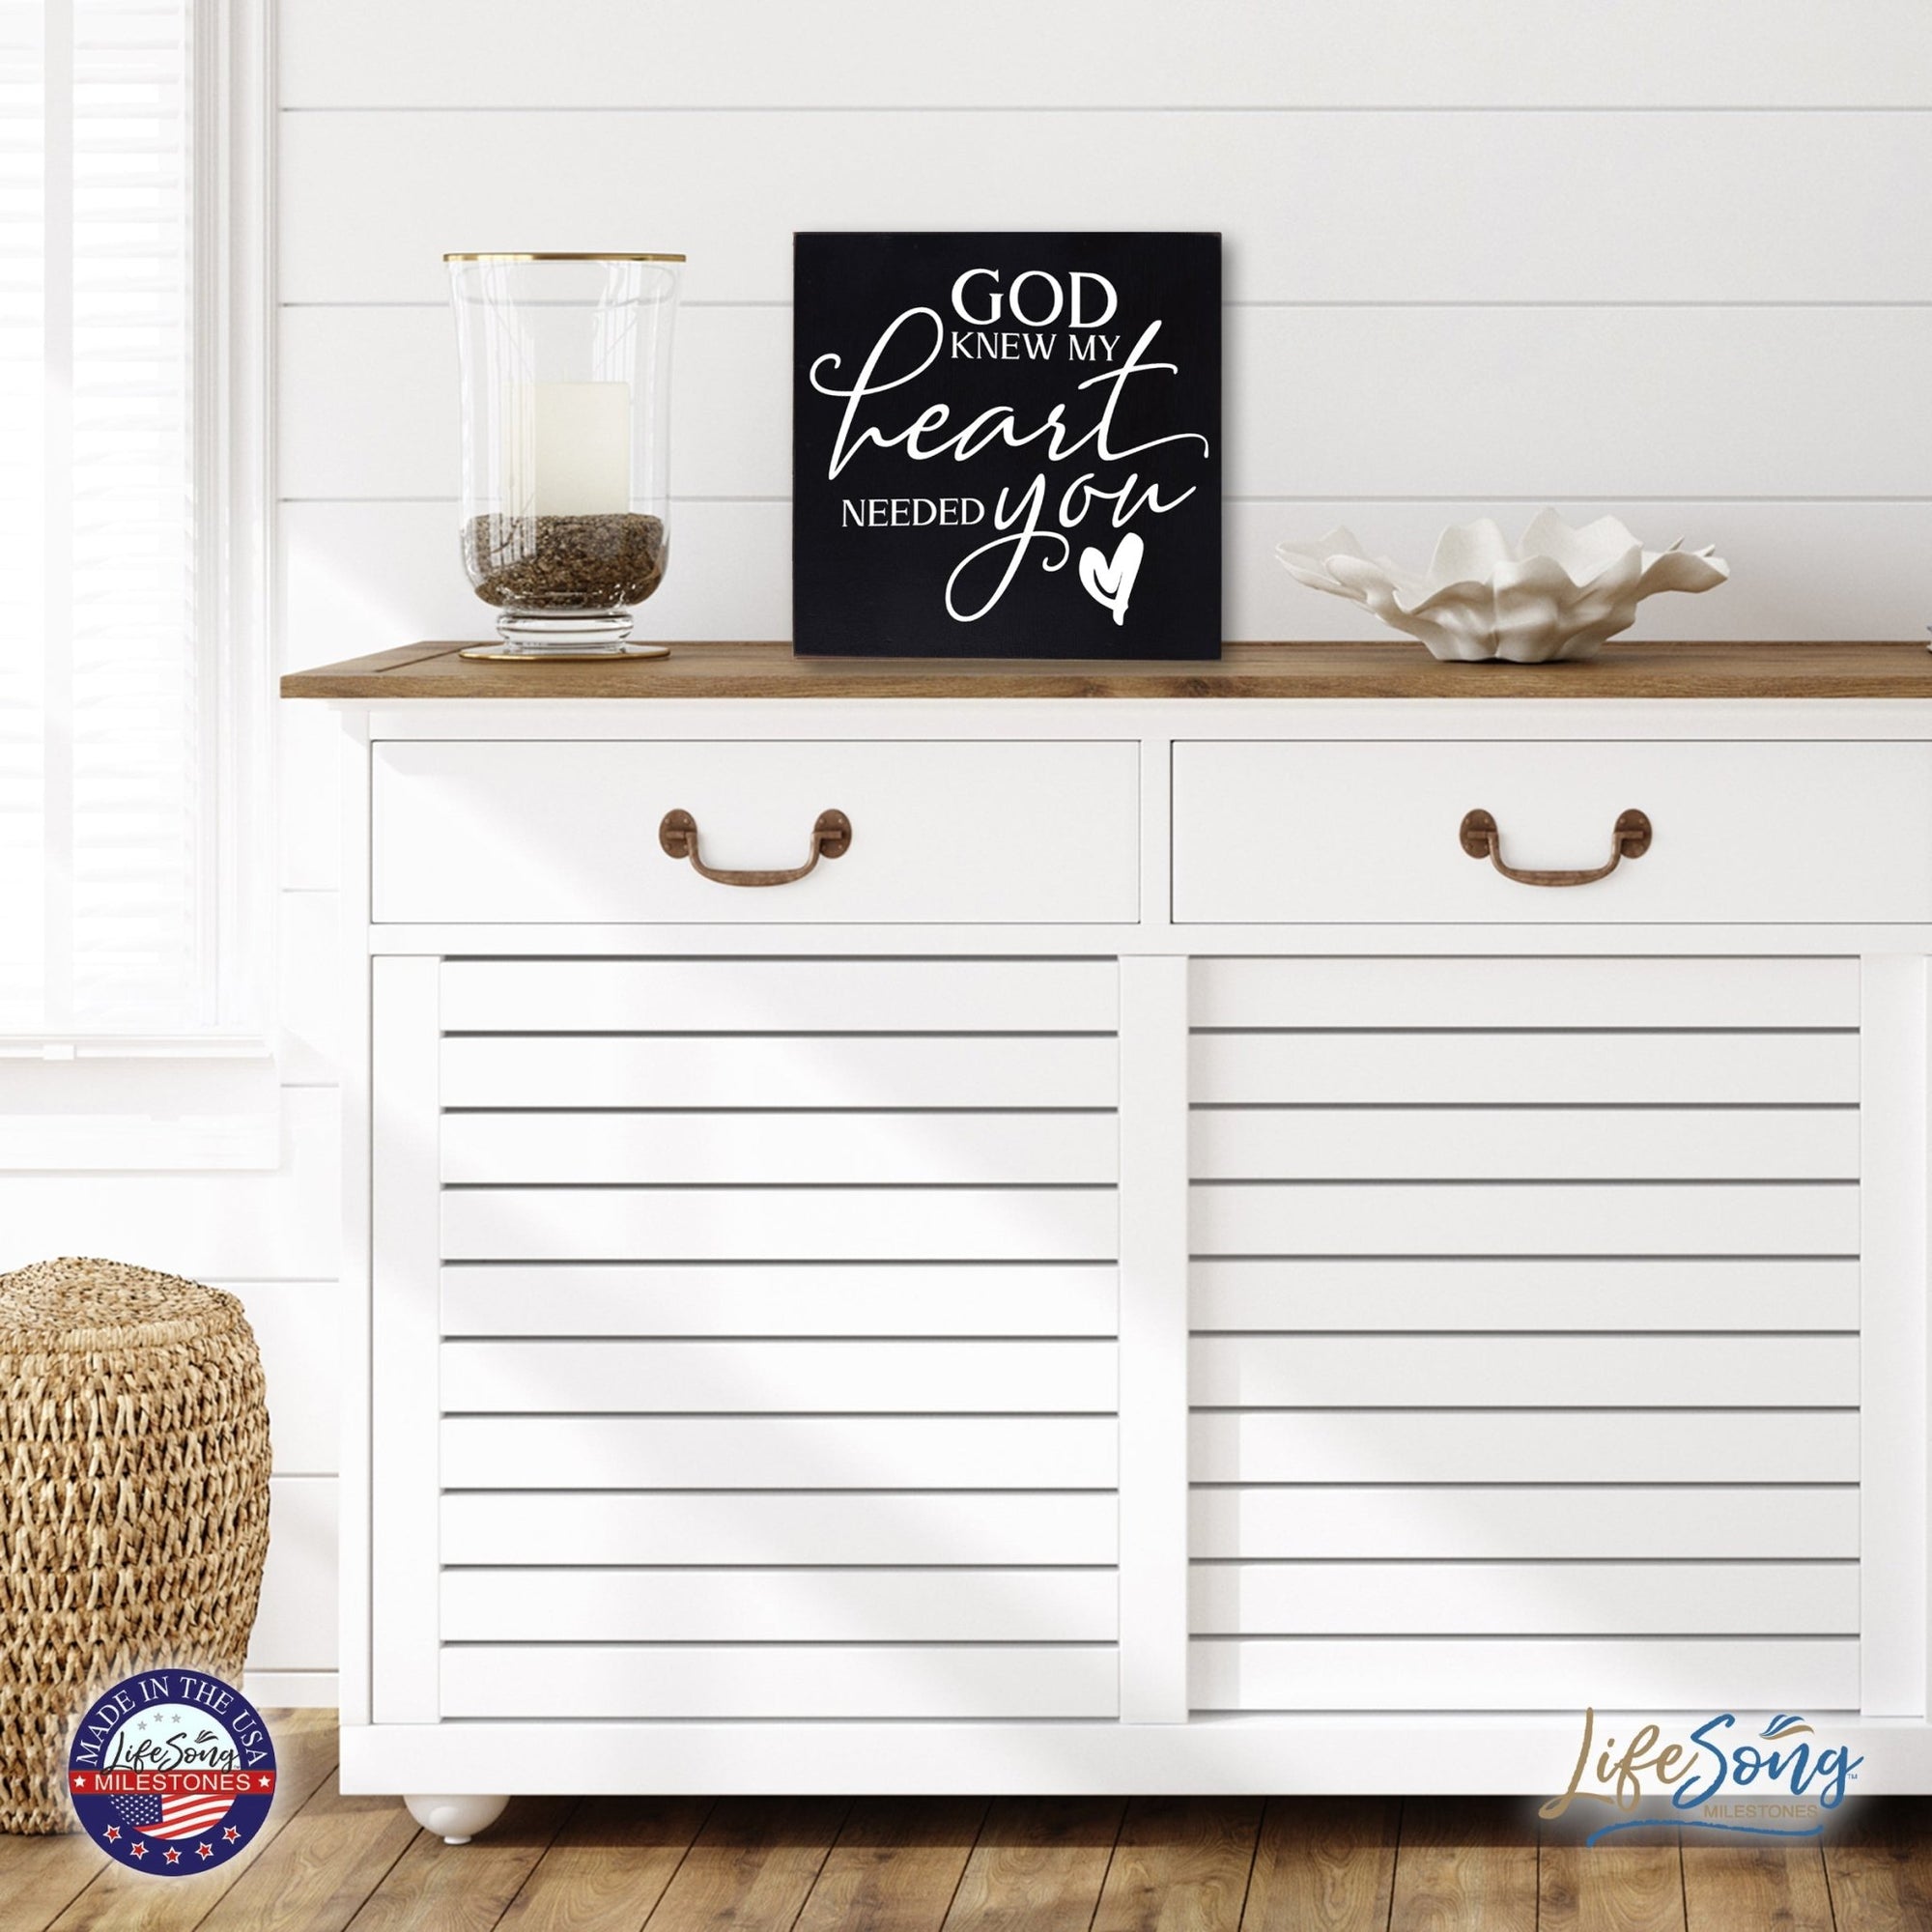 Modern Inspirational Shadow Box for Everyday Home Decorations 6x6 - God Knew My Heart (Script) - LifeSong Milestones